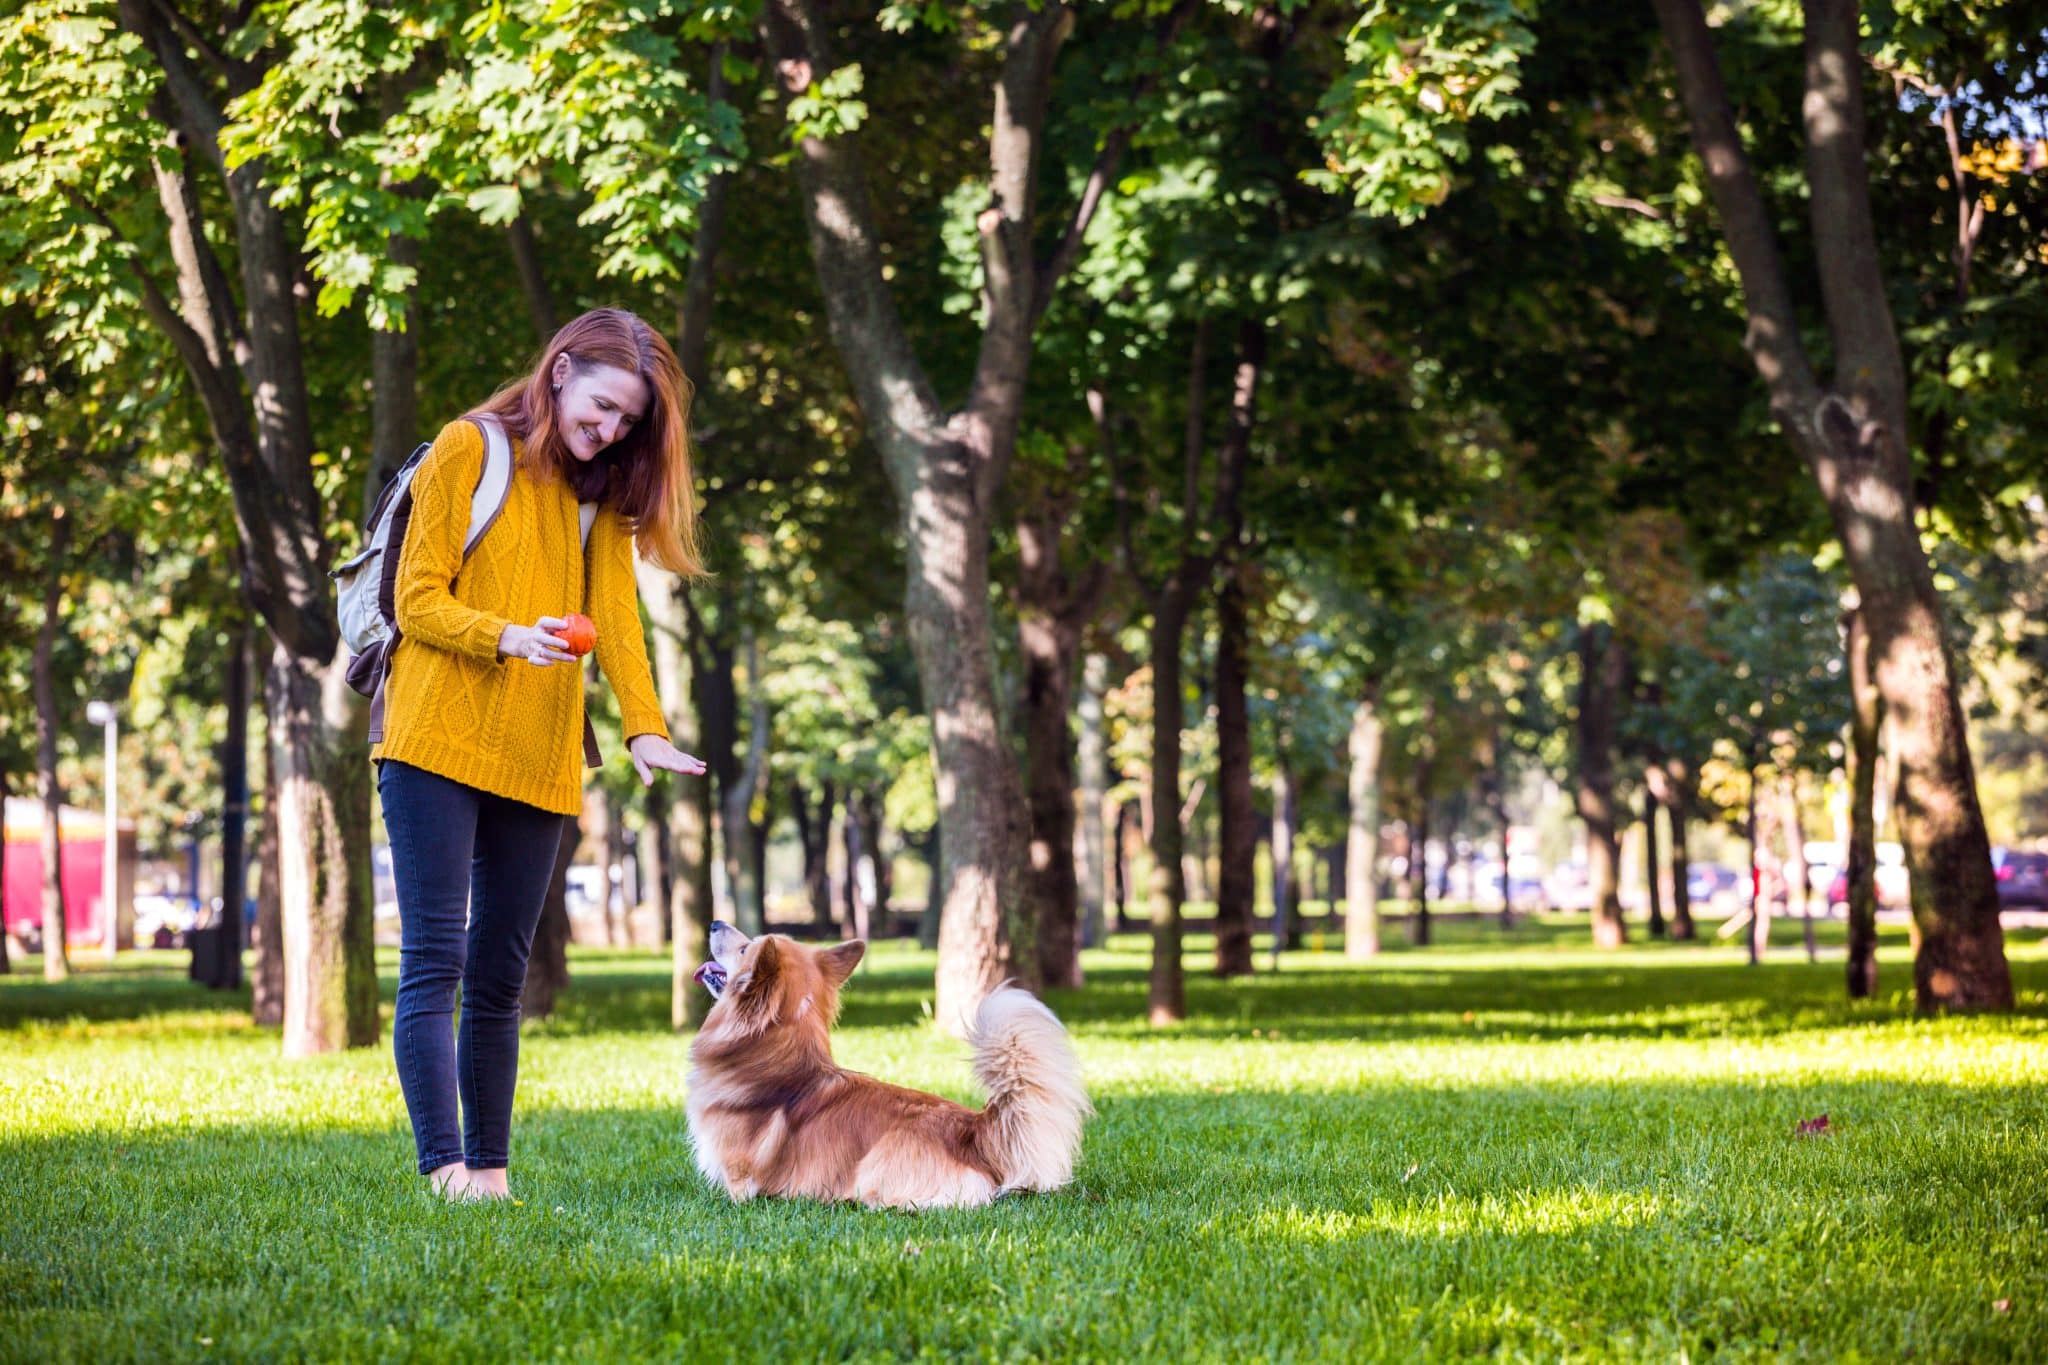 A woman is playing with her dog in a public park